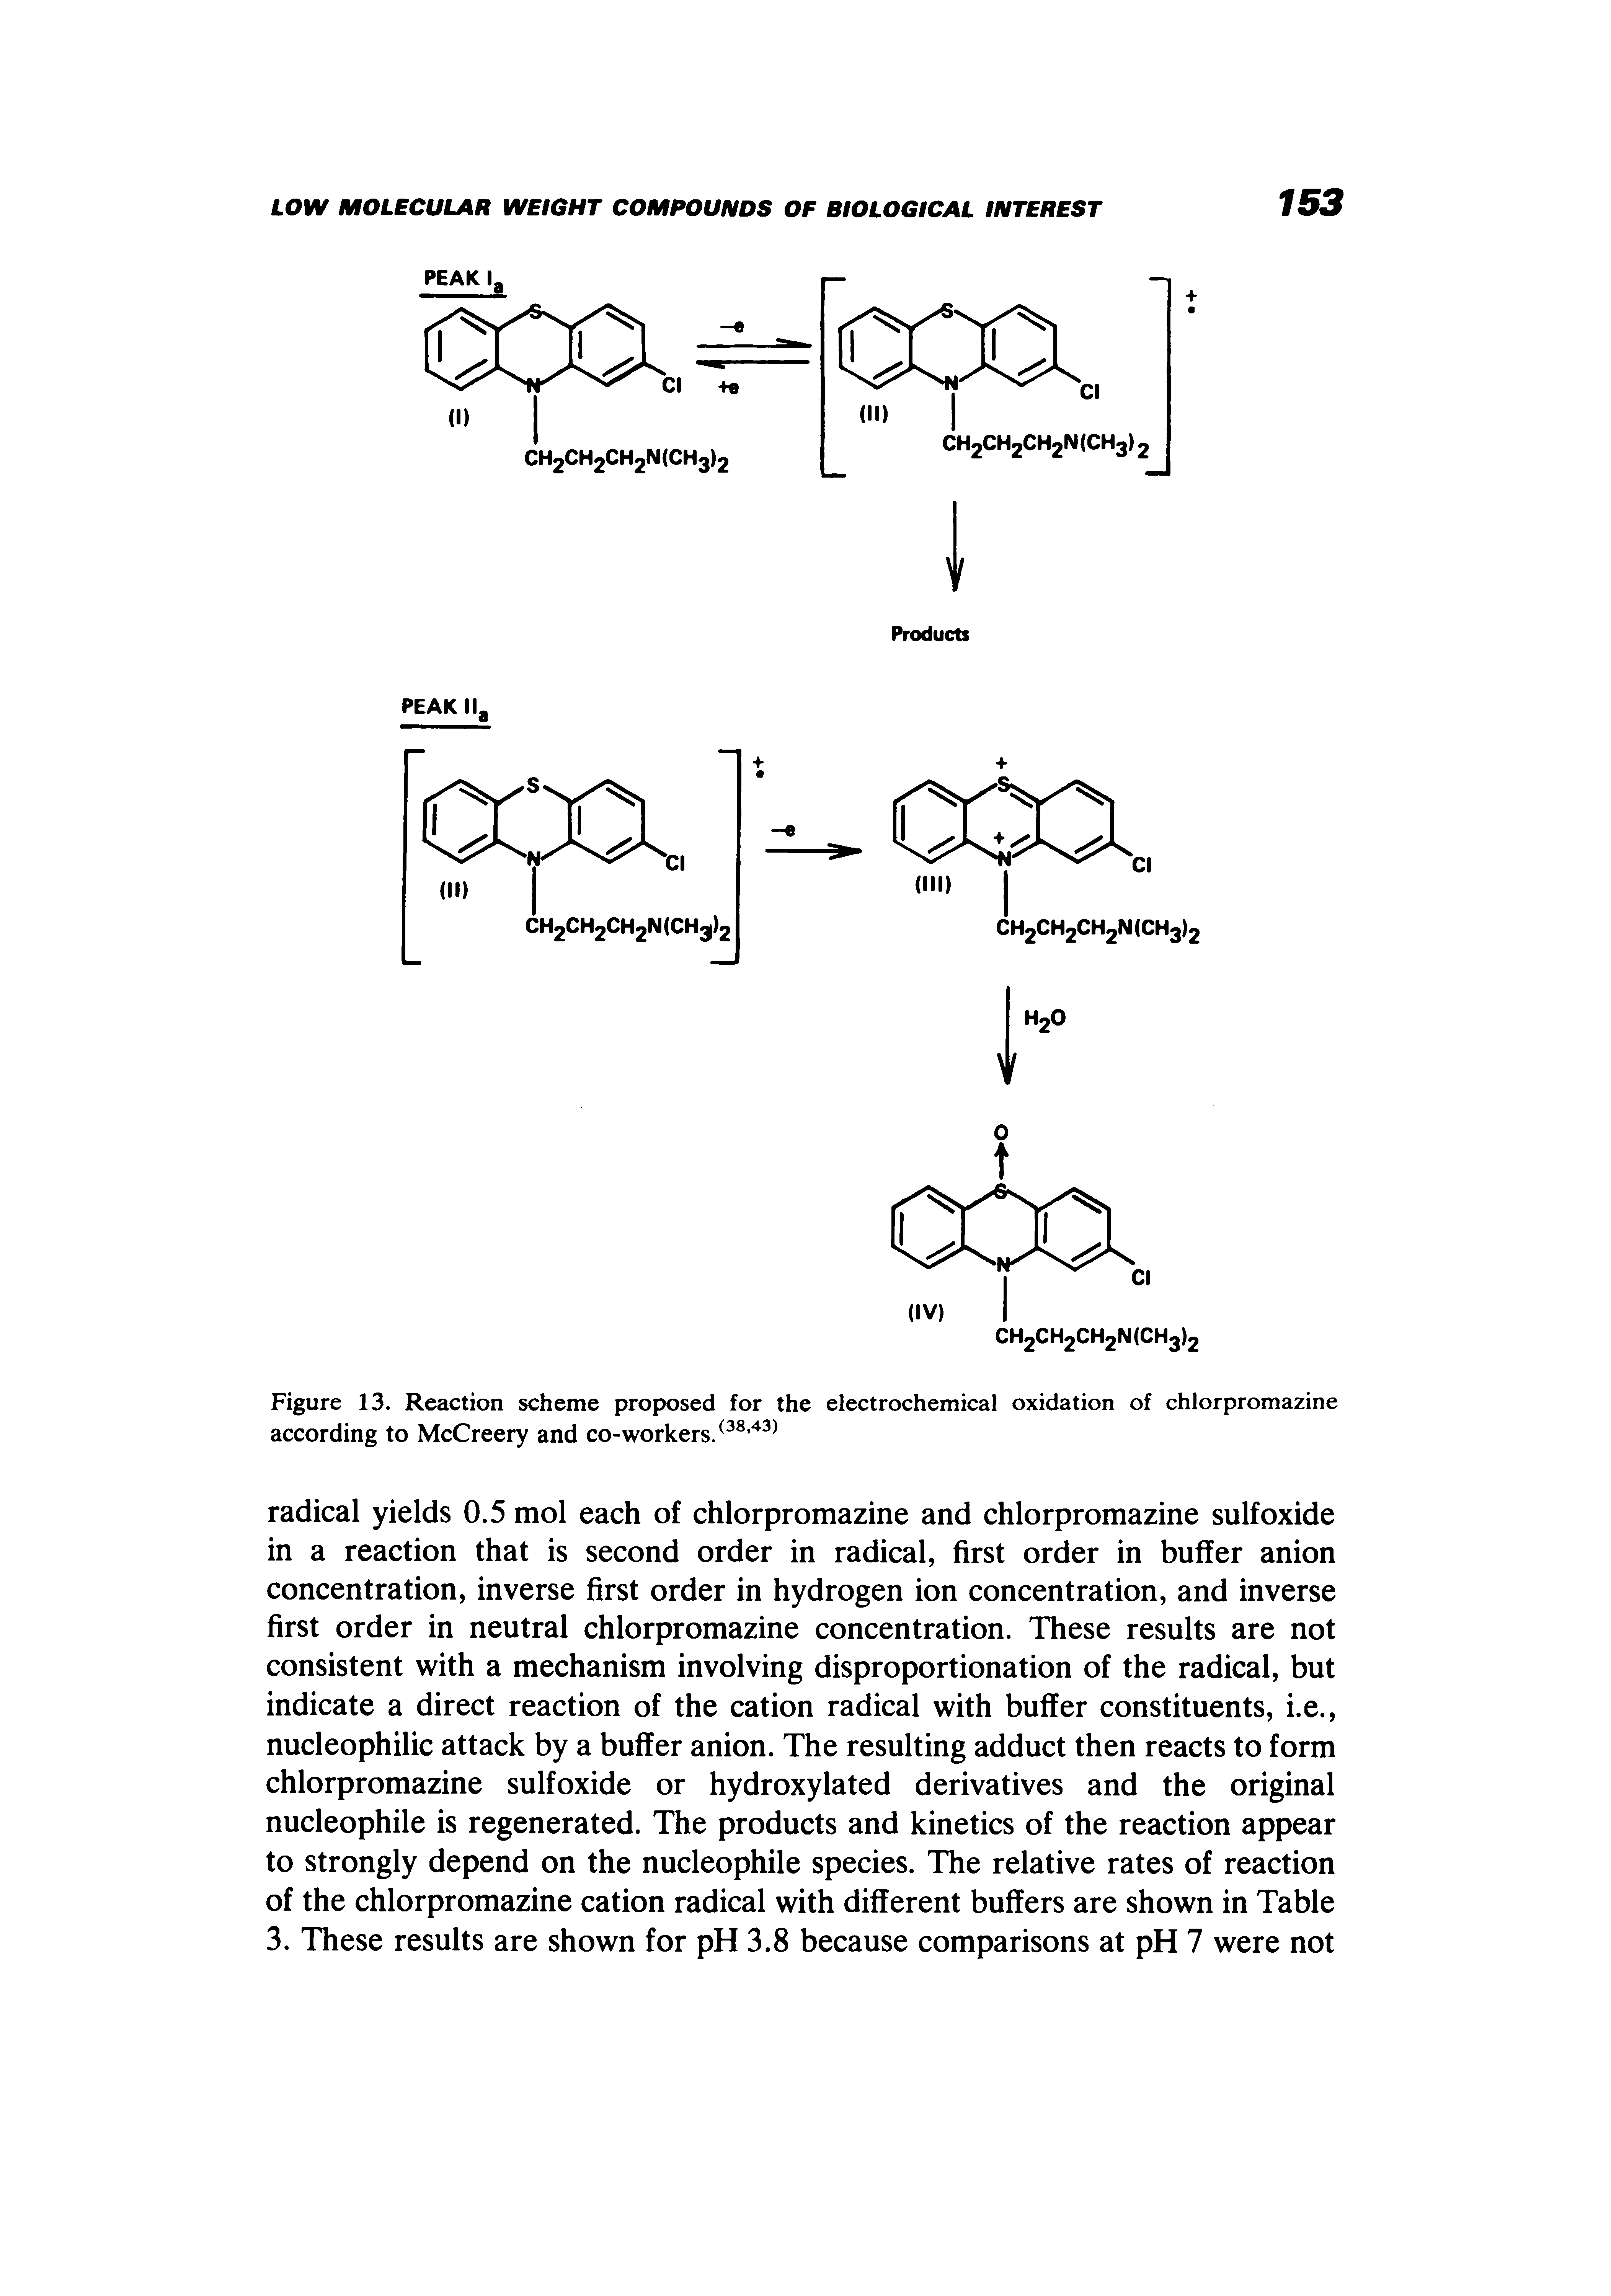 Figure 13. Reaction scheme proposed for the electrochemical oxidation of chlorpromazine according to McCreery and co-workers.